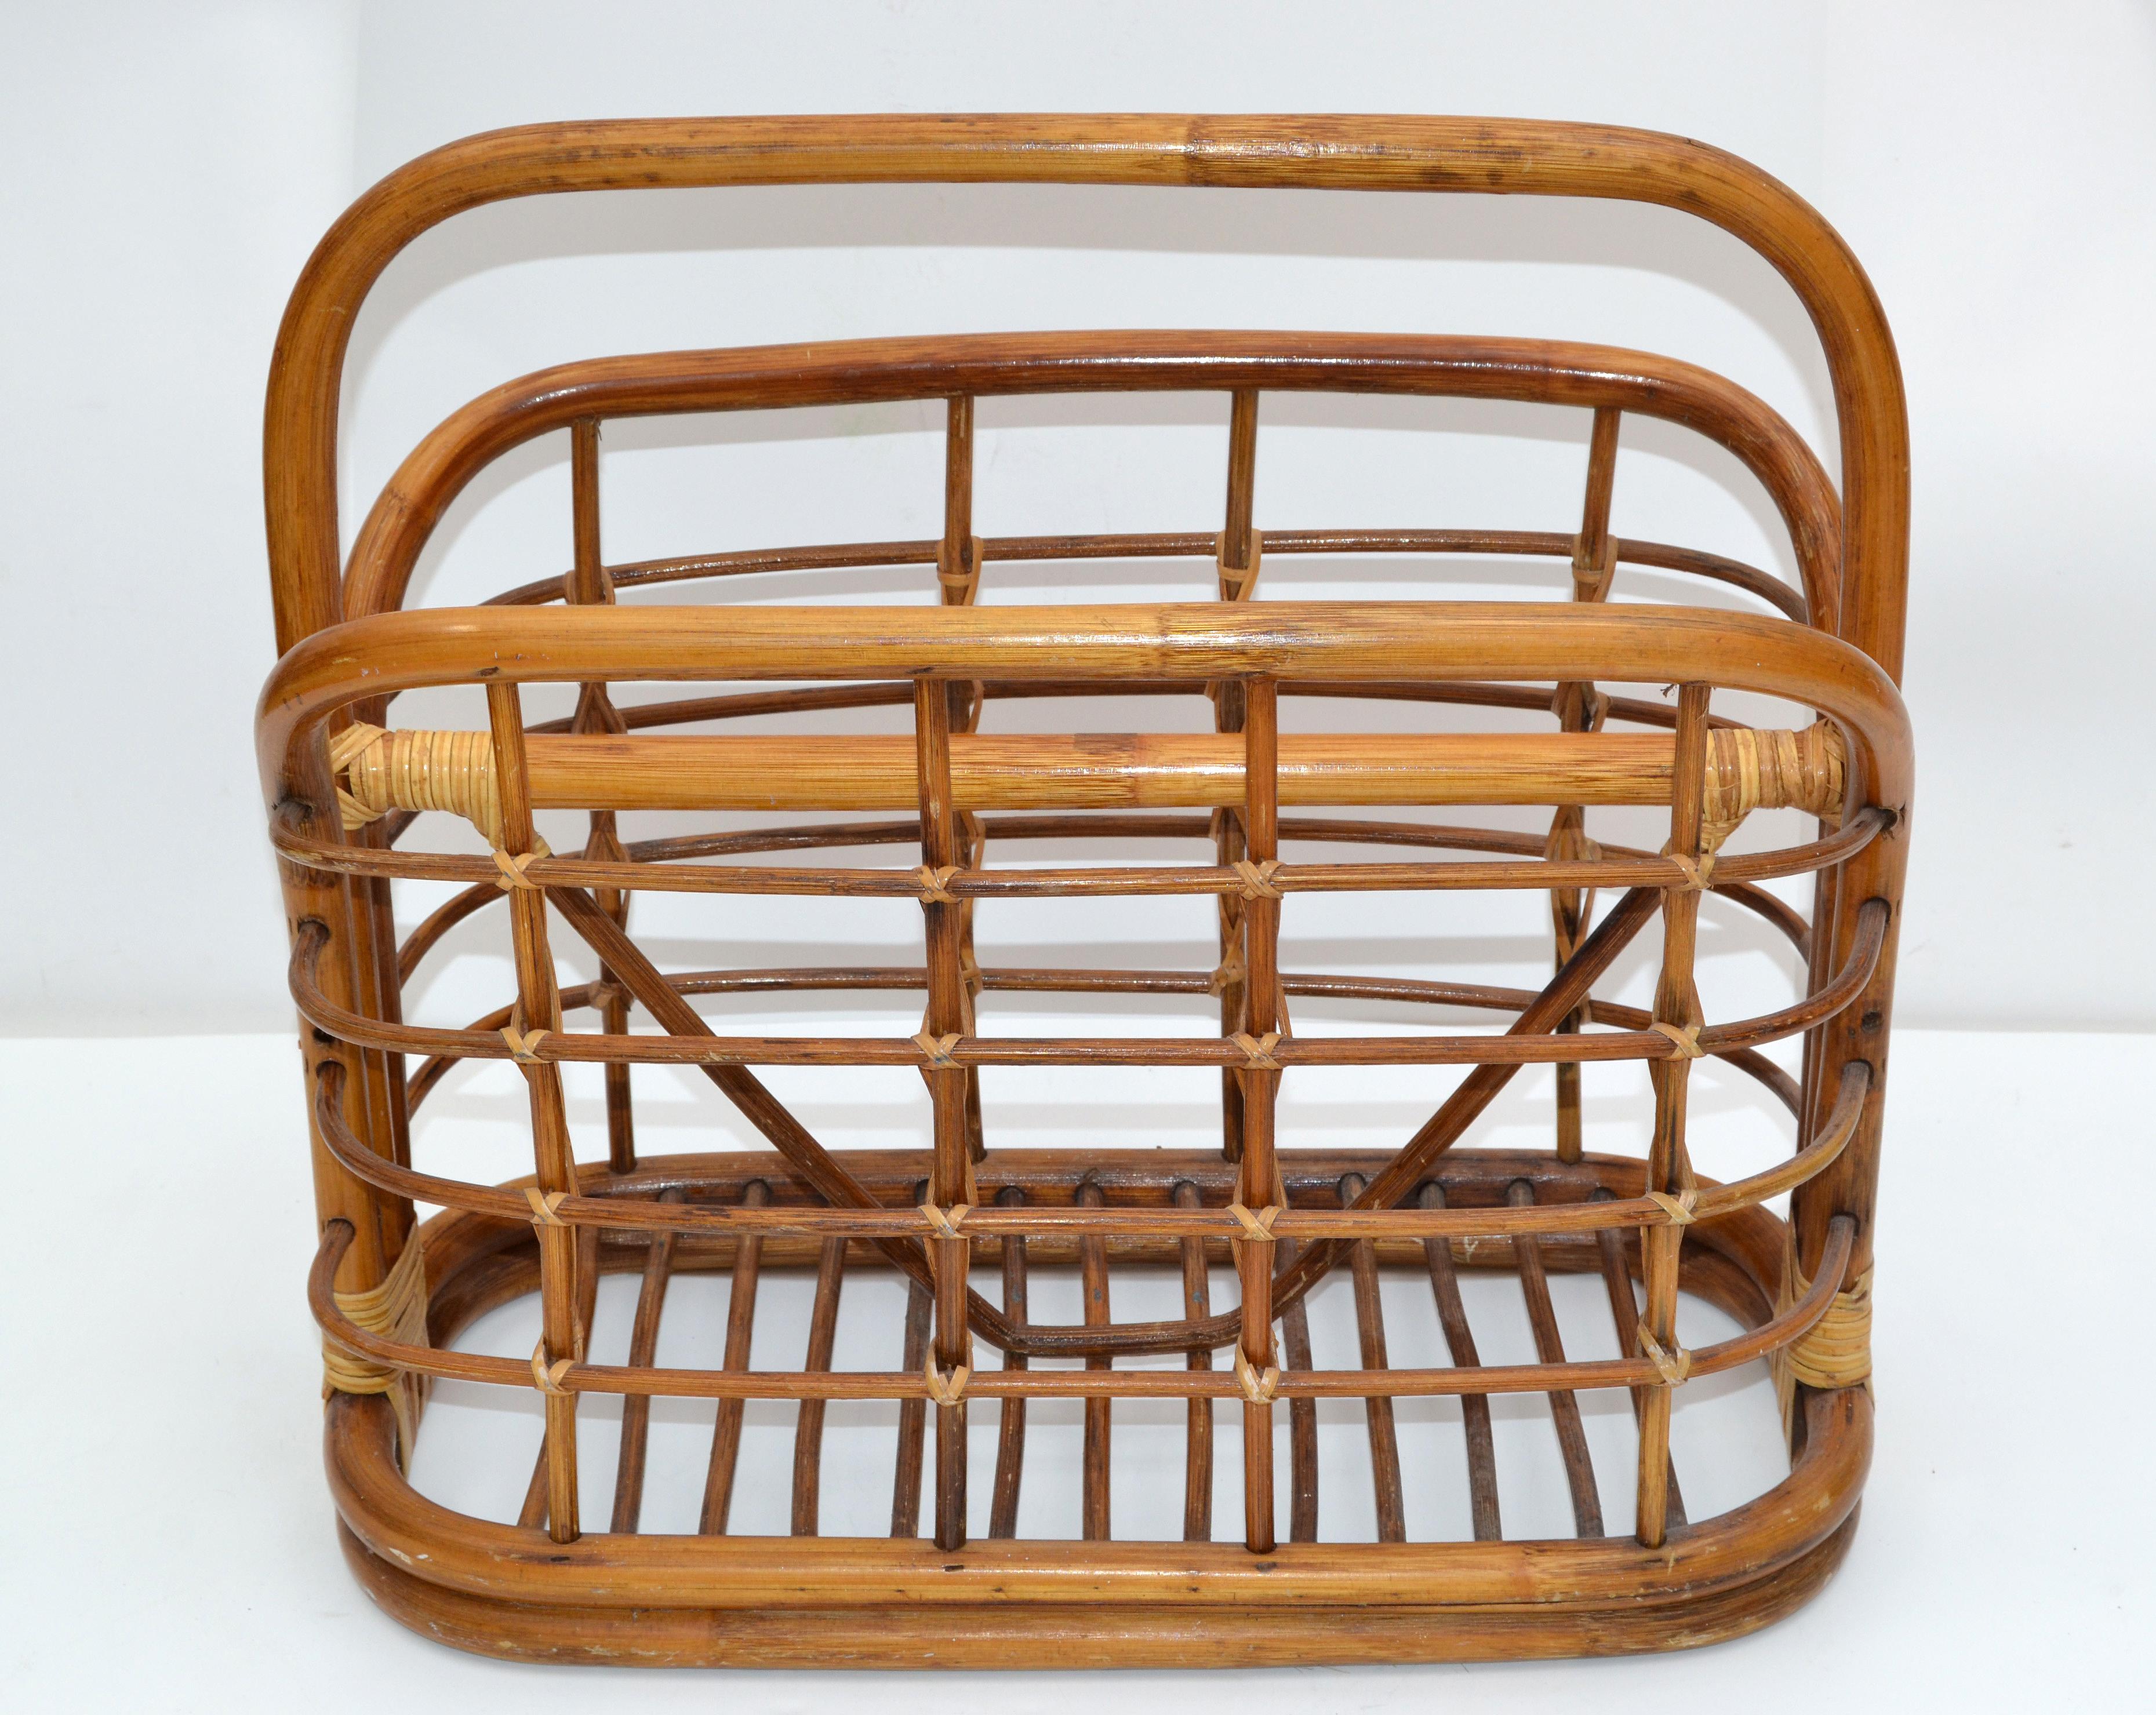 Mid-Century Modern boho chic handmade bamboo and cane magazine rack from the late 1970s.
It has been restored and is ready for a new Home.
Great for Your Florida Sun Room.
  